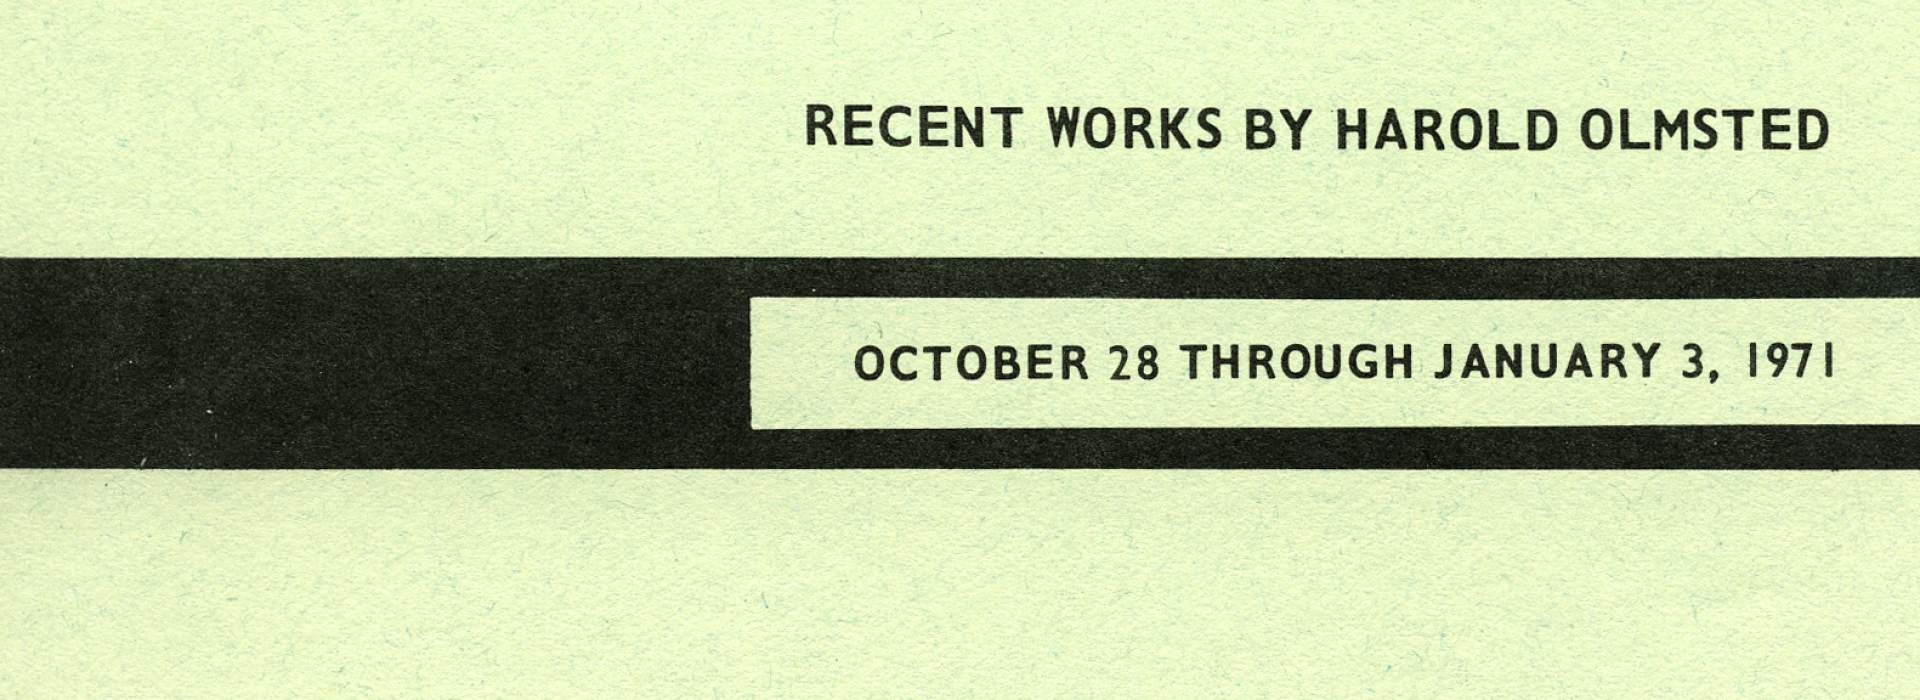 Recent Works by Harold Olmsted Exhibition program cover title